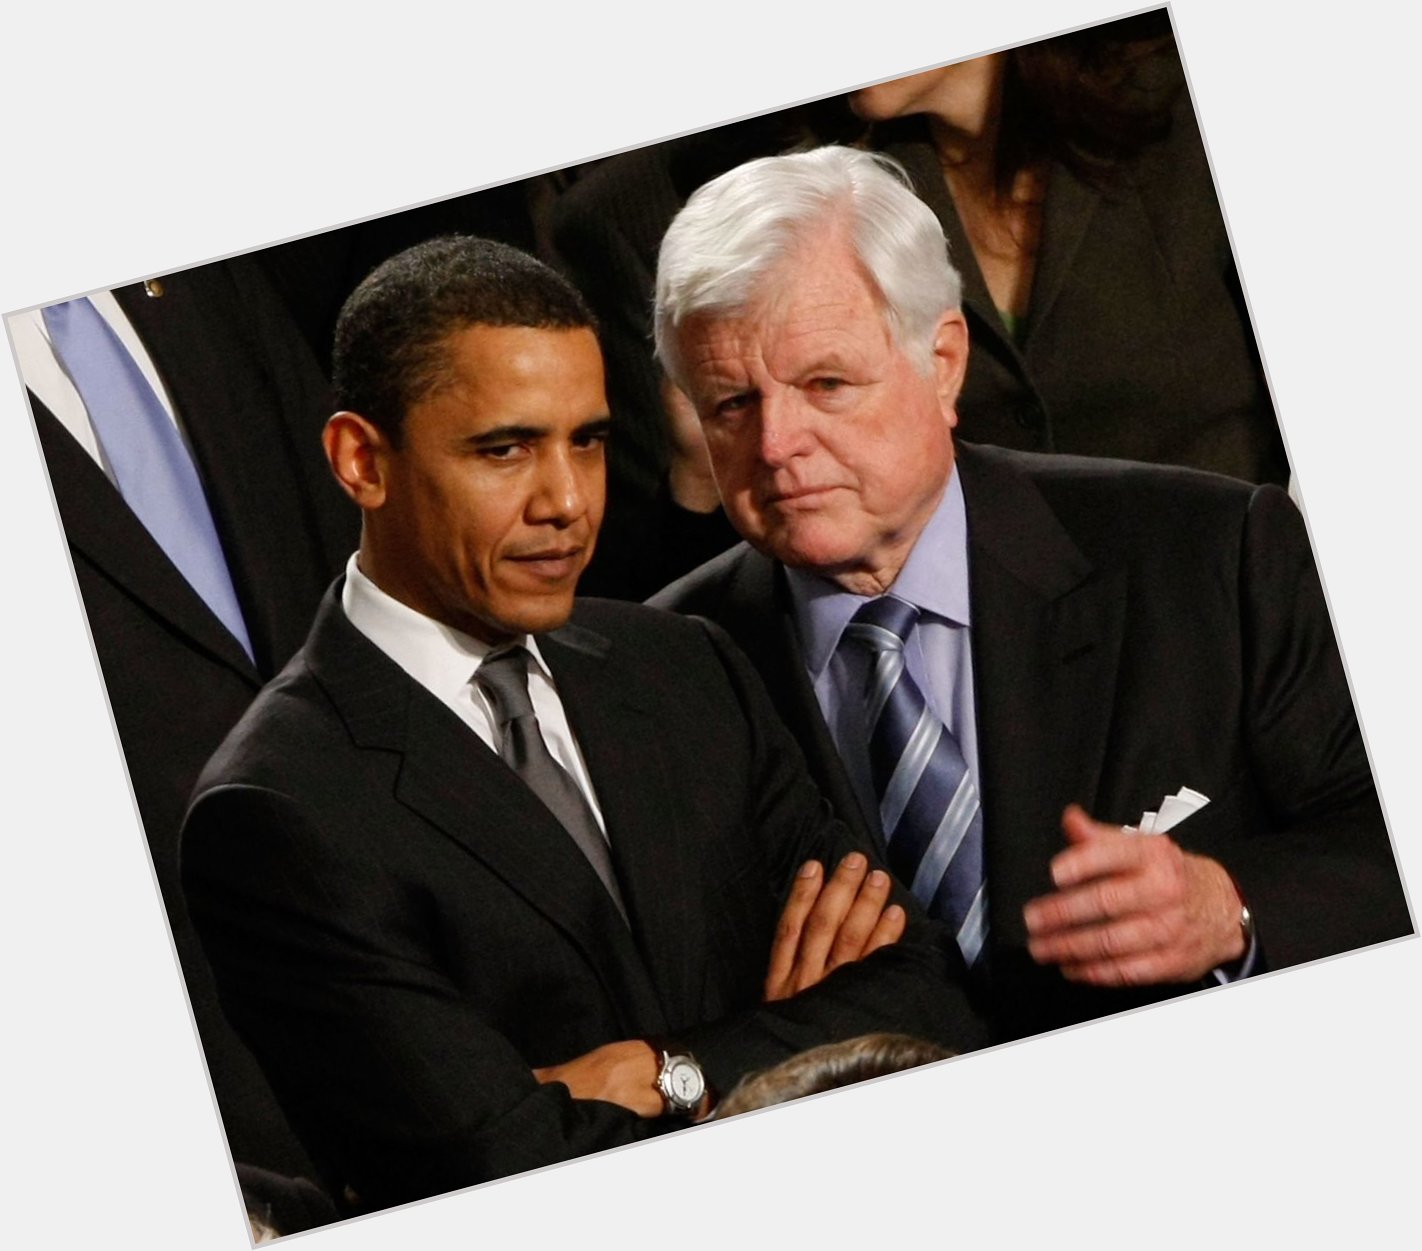 Barack Obama and Ted Kennedy. 28th January, 2008.

Today is Ted Kennedy s 90th birthday. Happy birthday to him! 